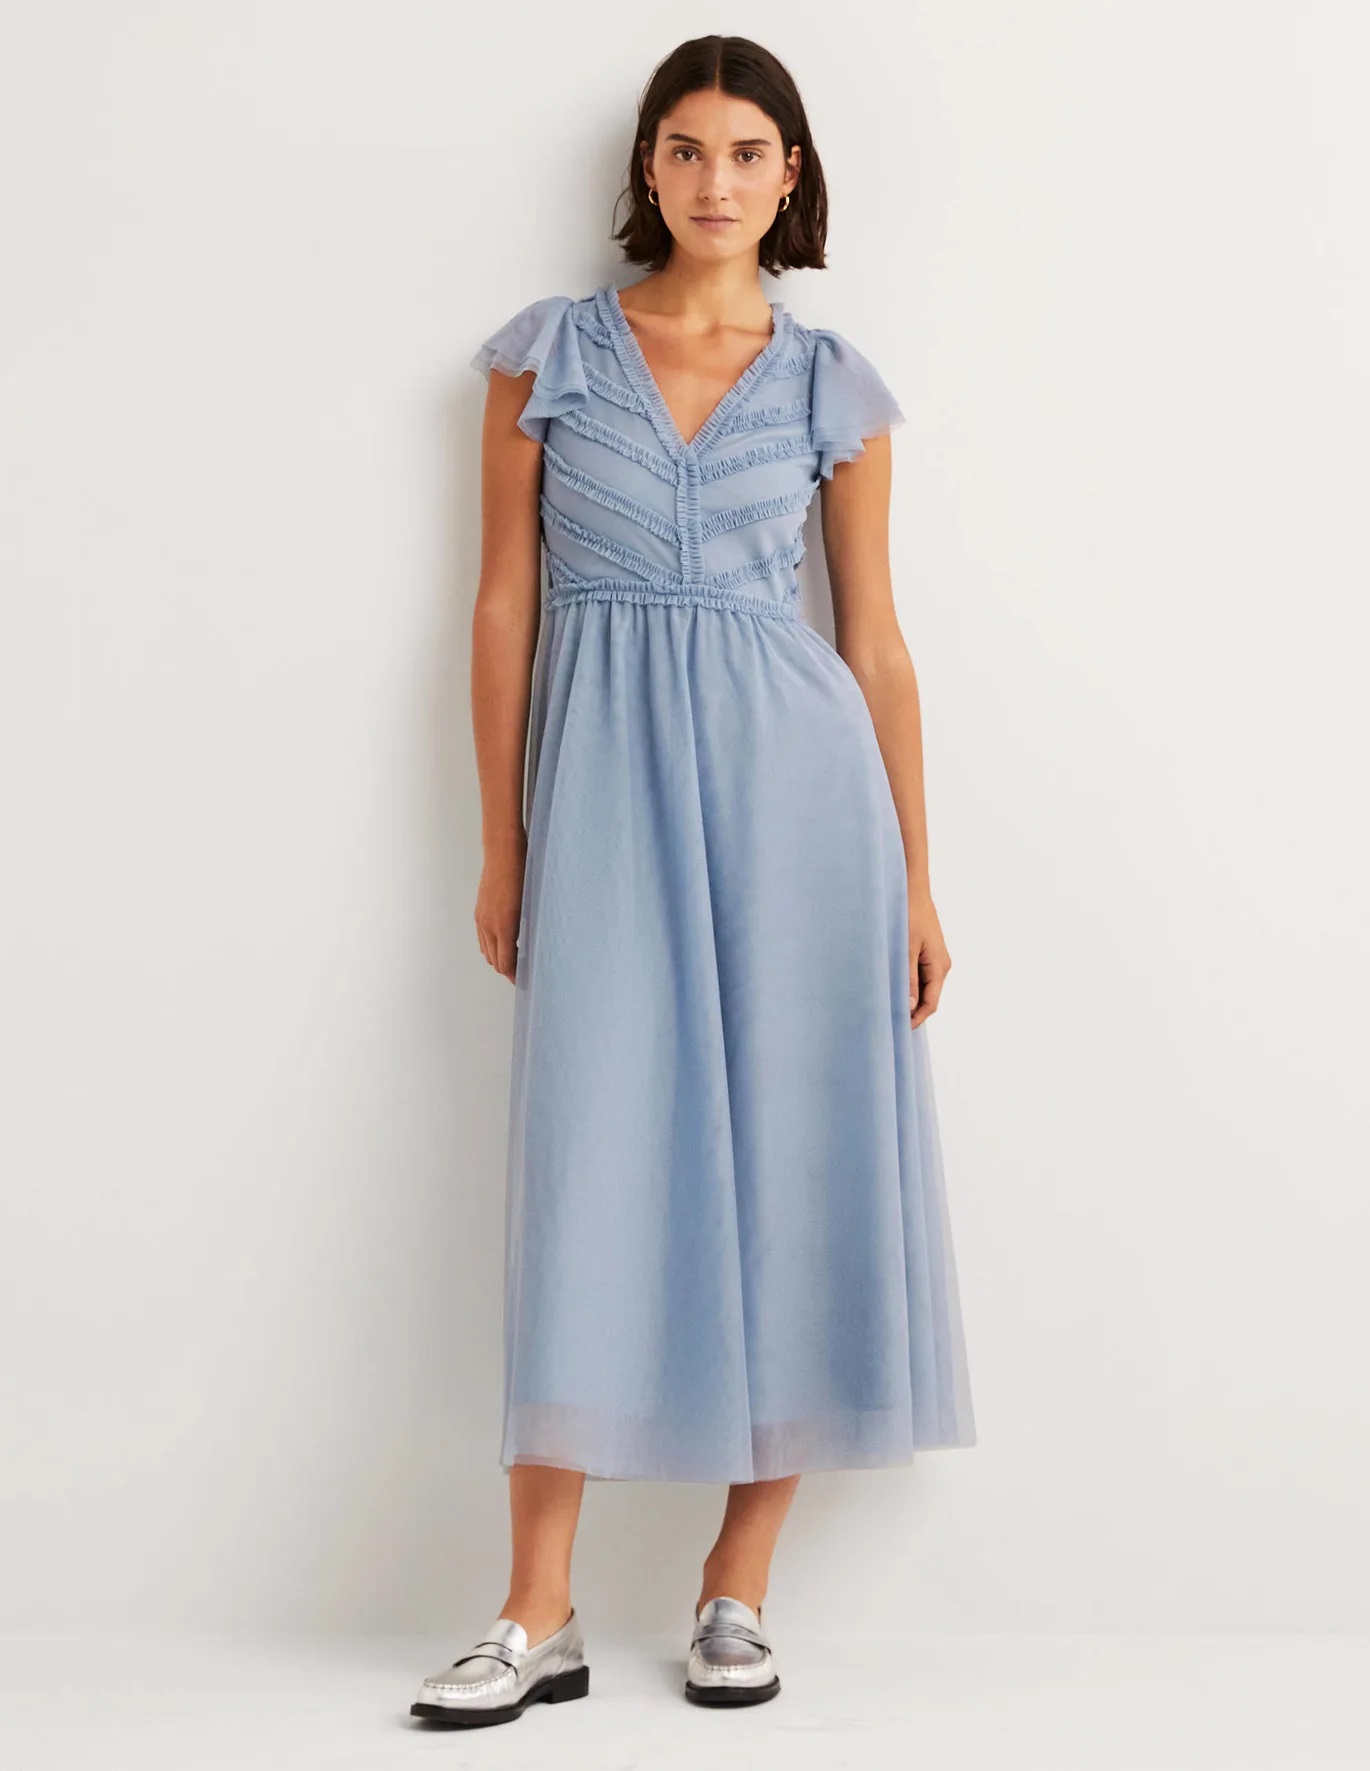 Best Wedding Guest Attire Ideas: Comprehensive Guide to Wearing One I Stay at Home Mum